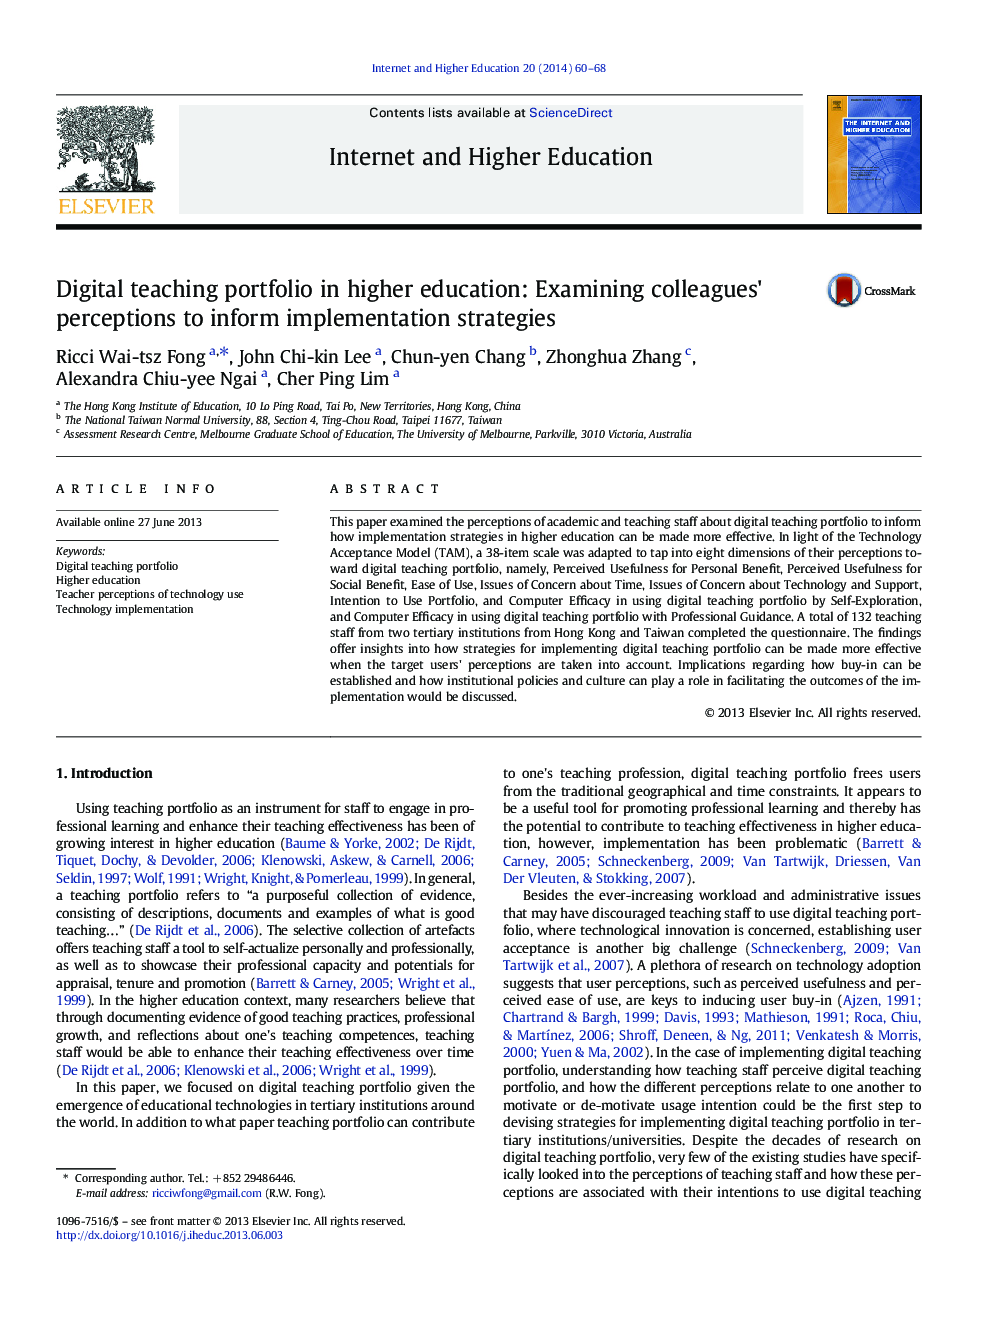 Digital teaching portfolio in higher education: Examining colleagues' perceptions to inform implementation strategies